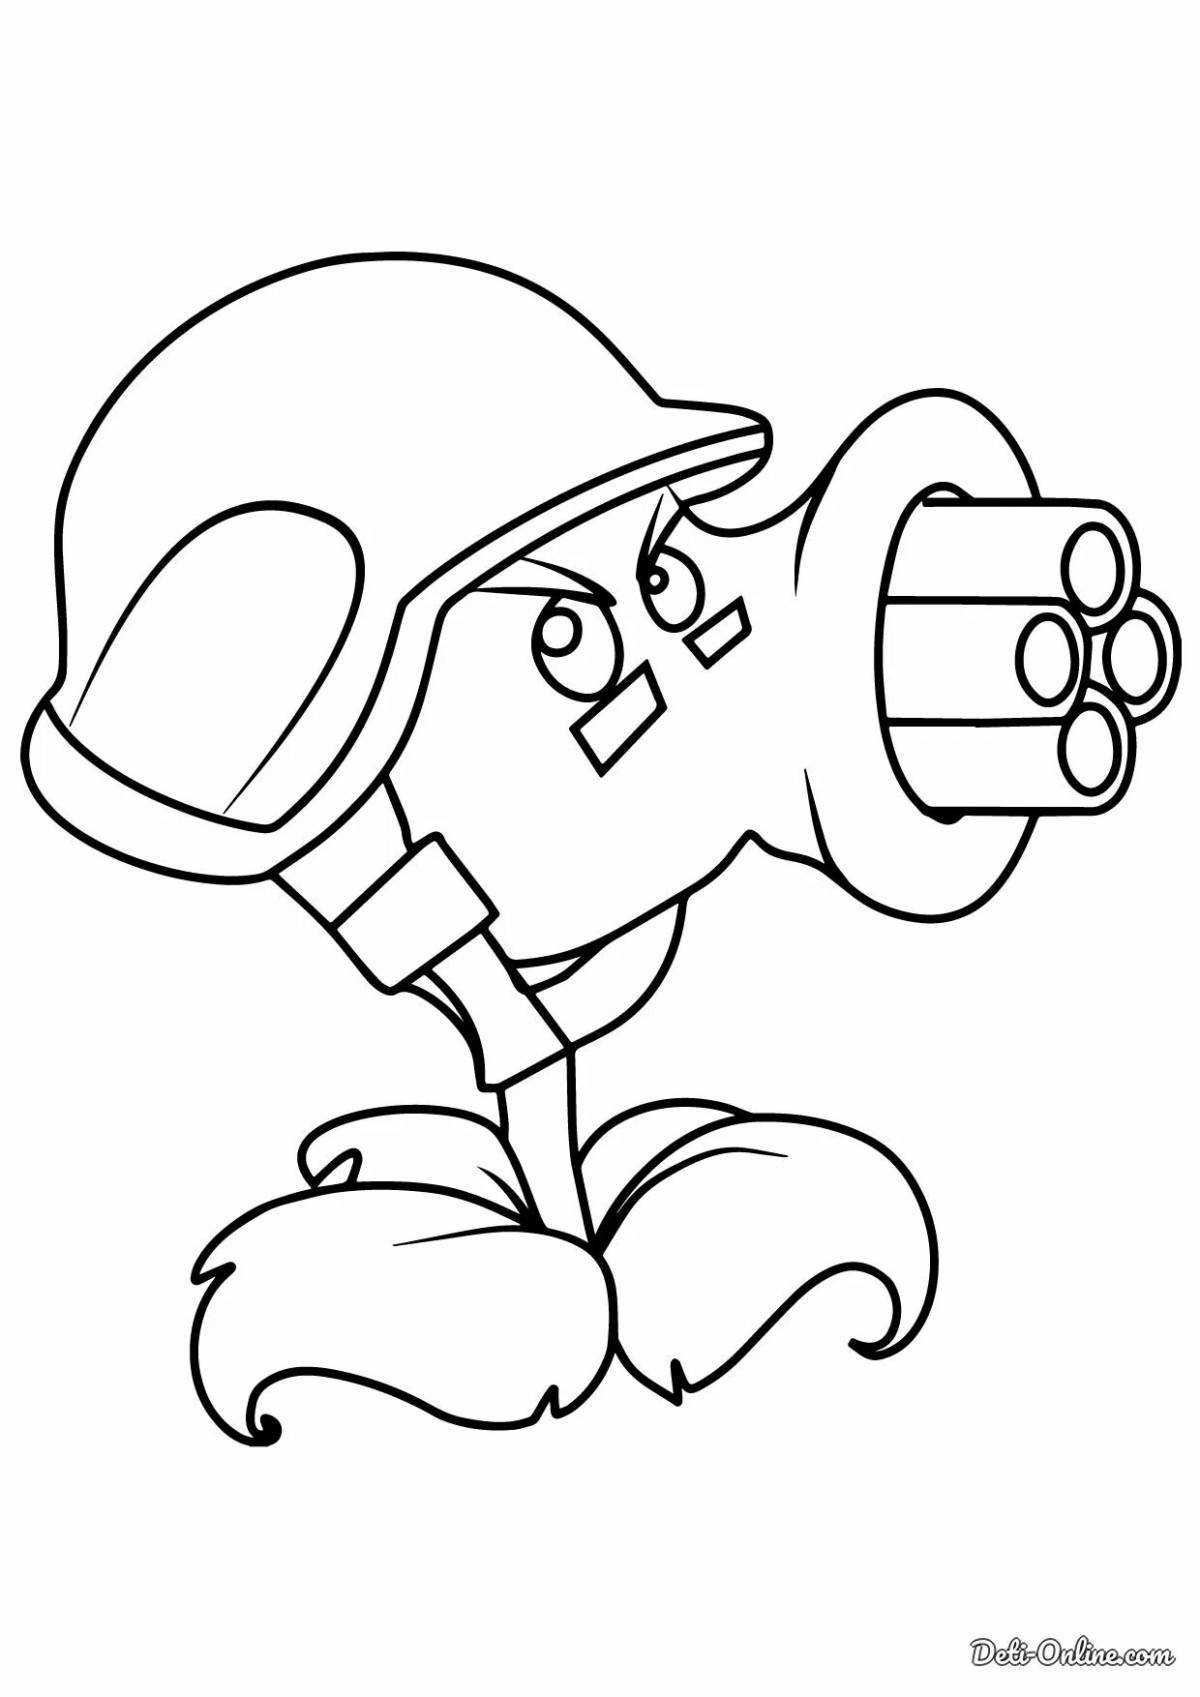 Coloring page unusual pea shooter